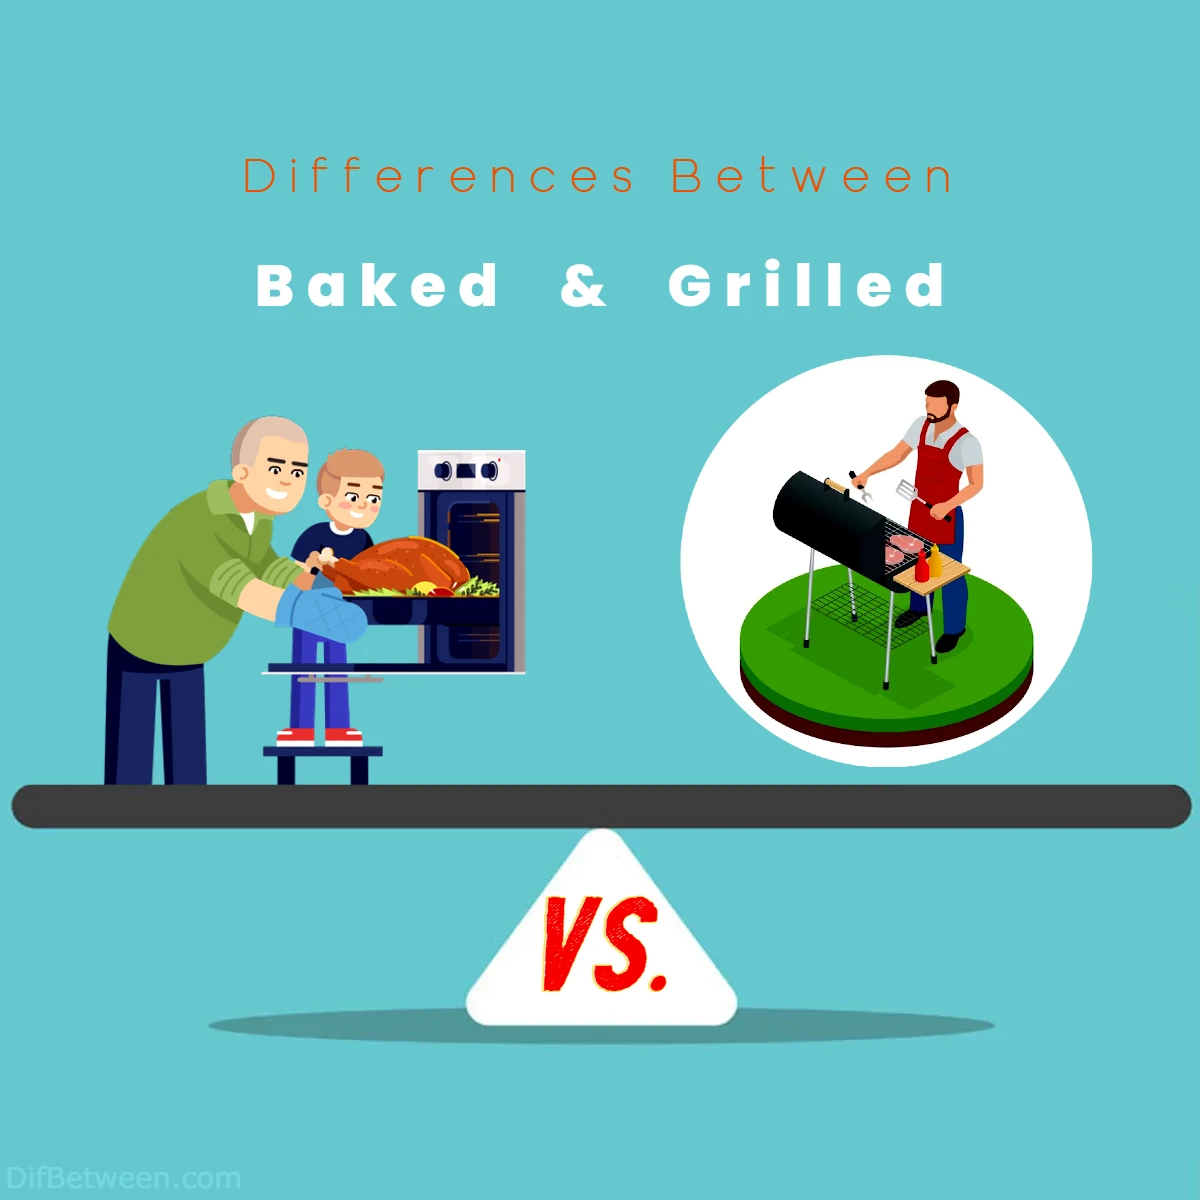 Differences Between Baked vs Grilled